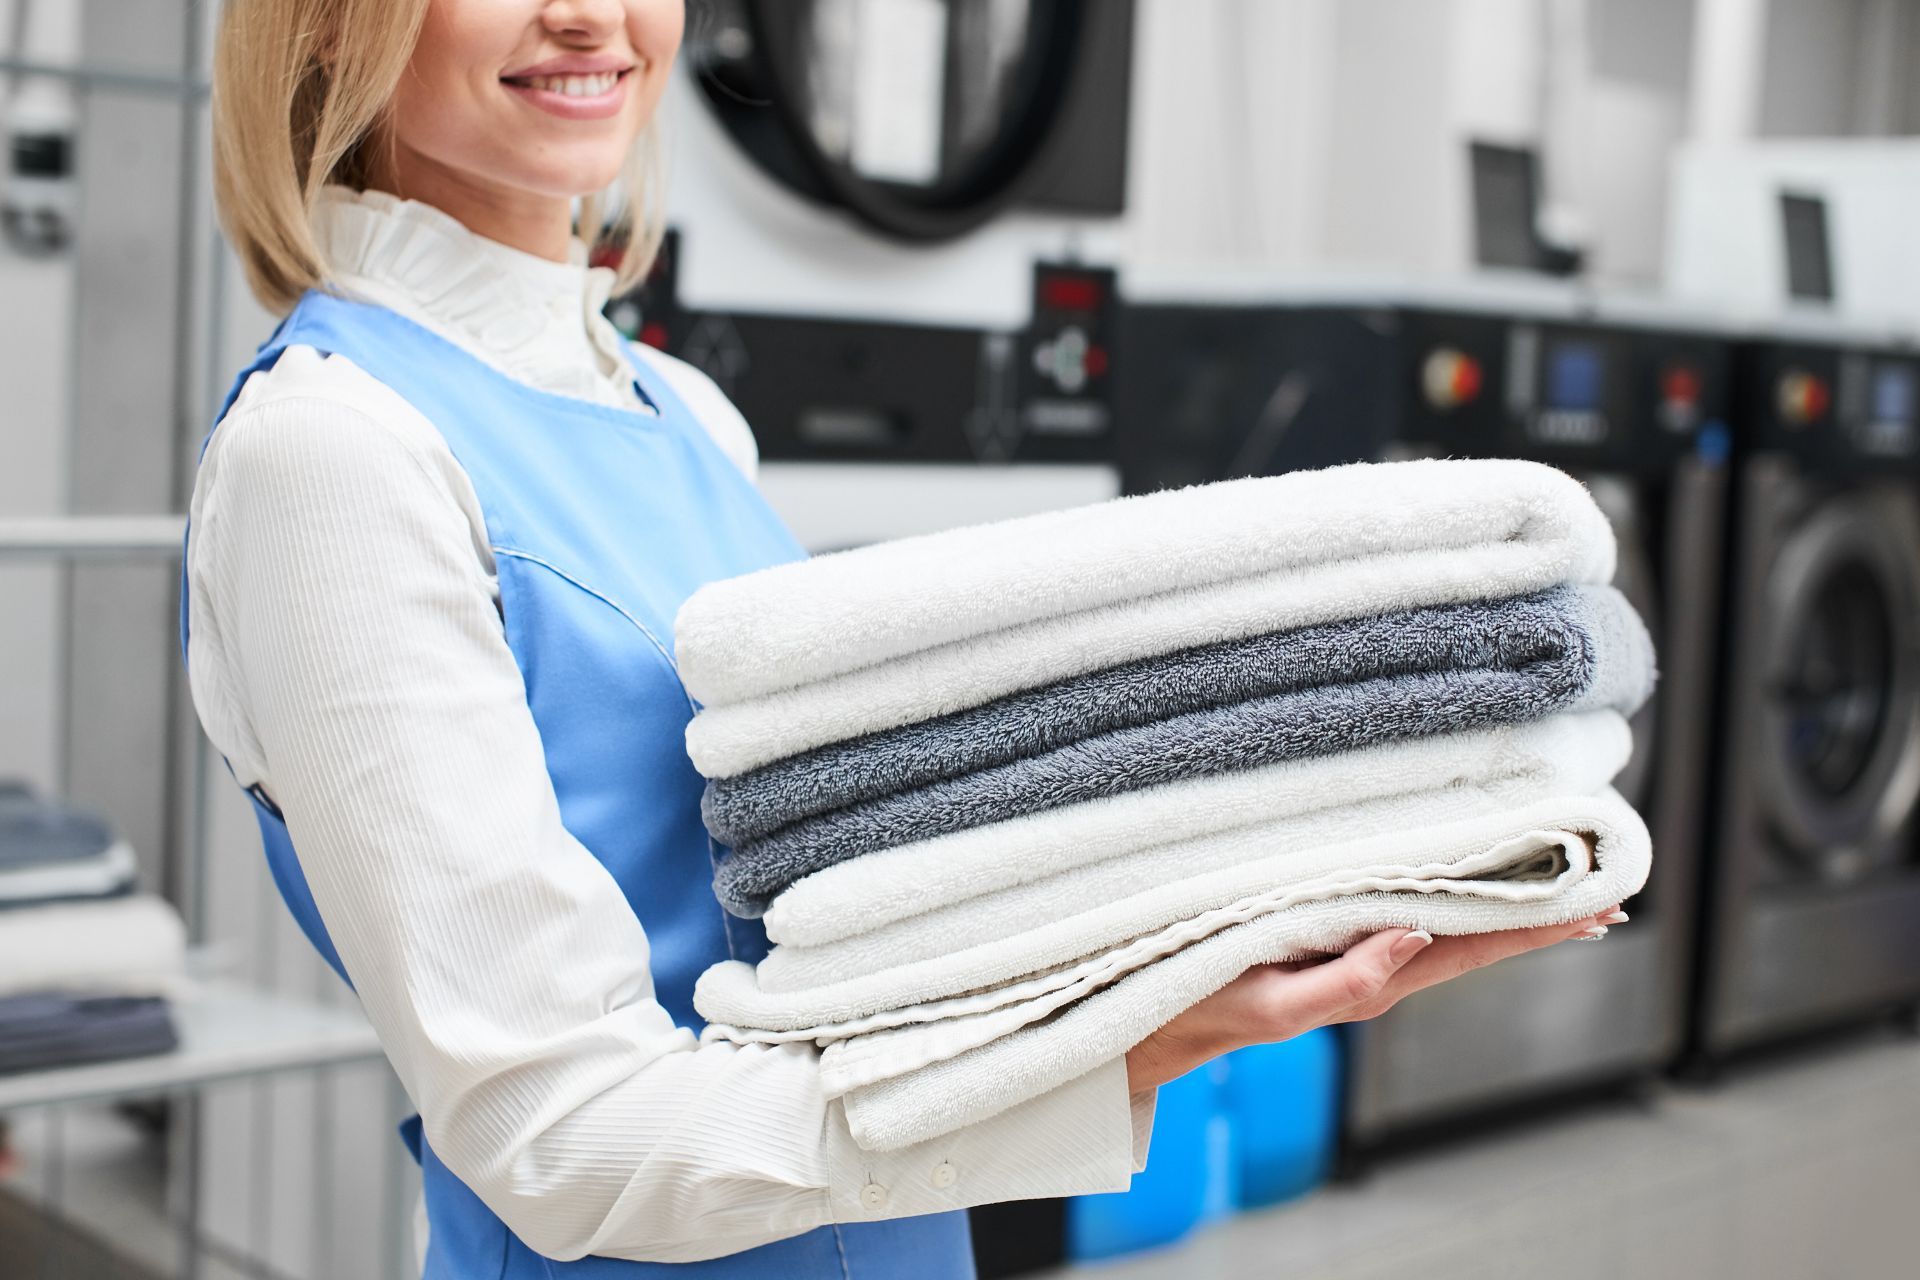 Maui's Quality Dry Cleaning & Laundry